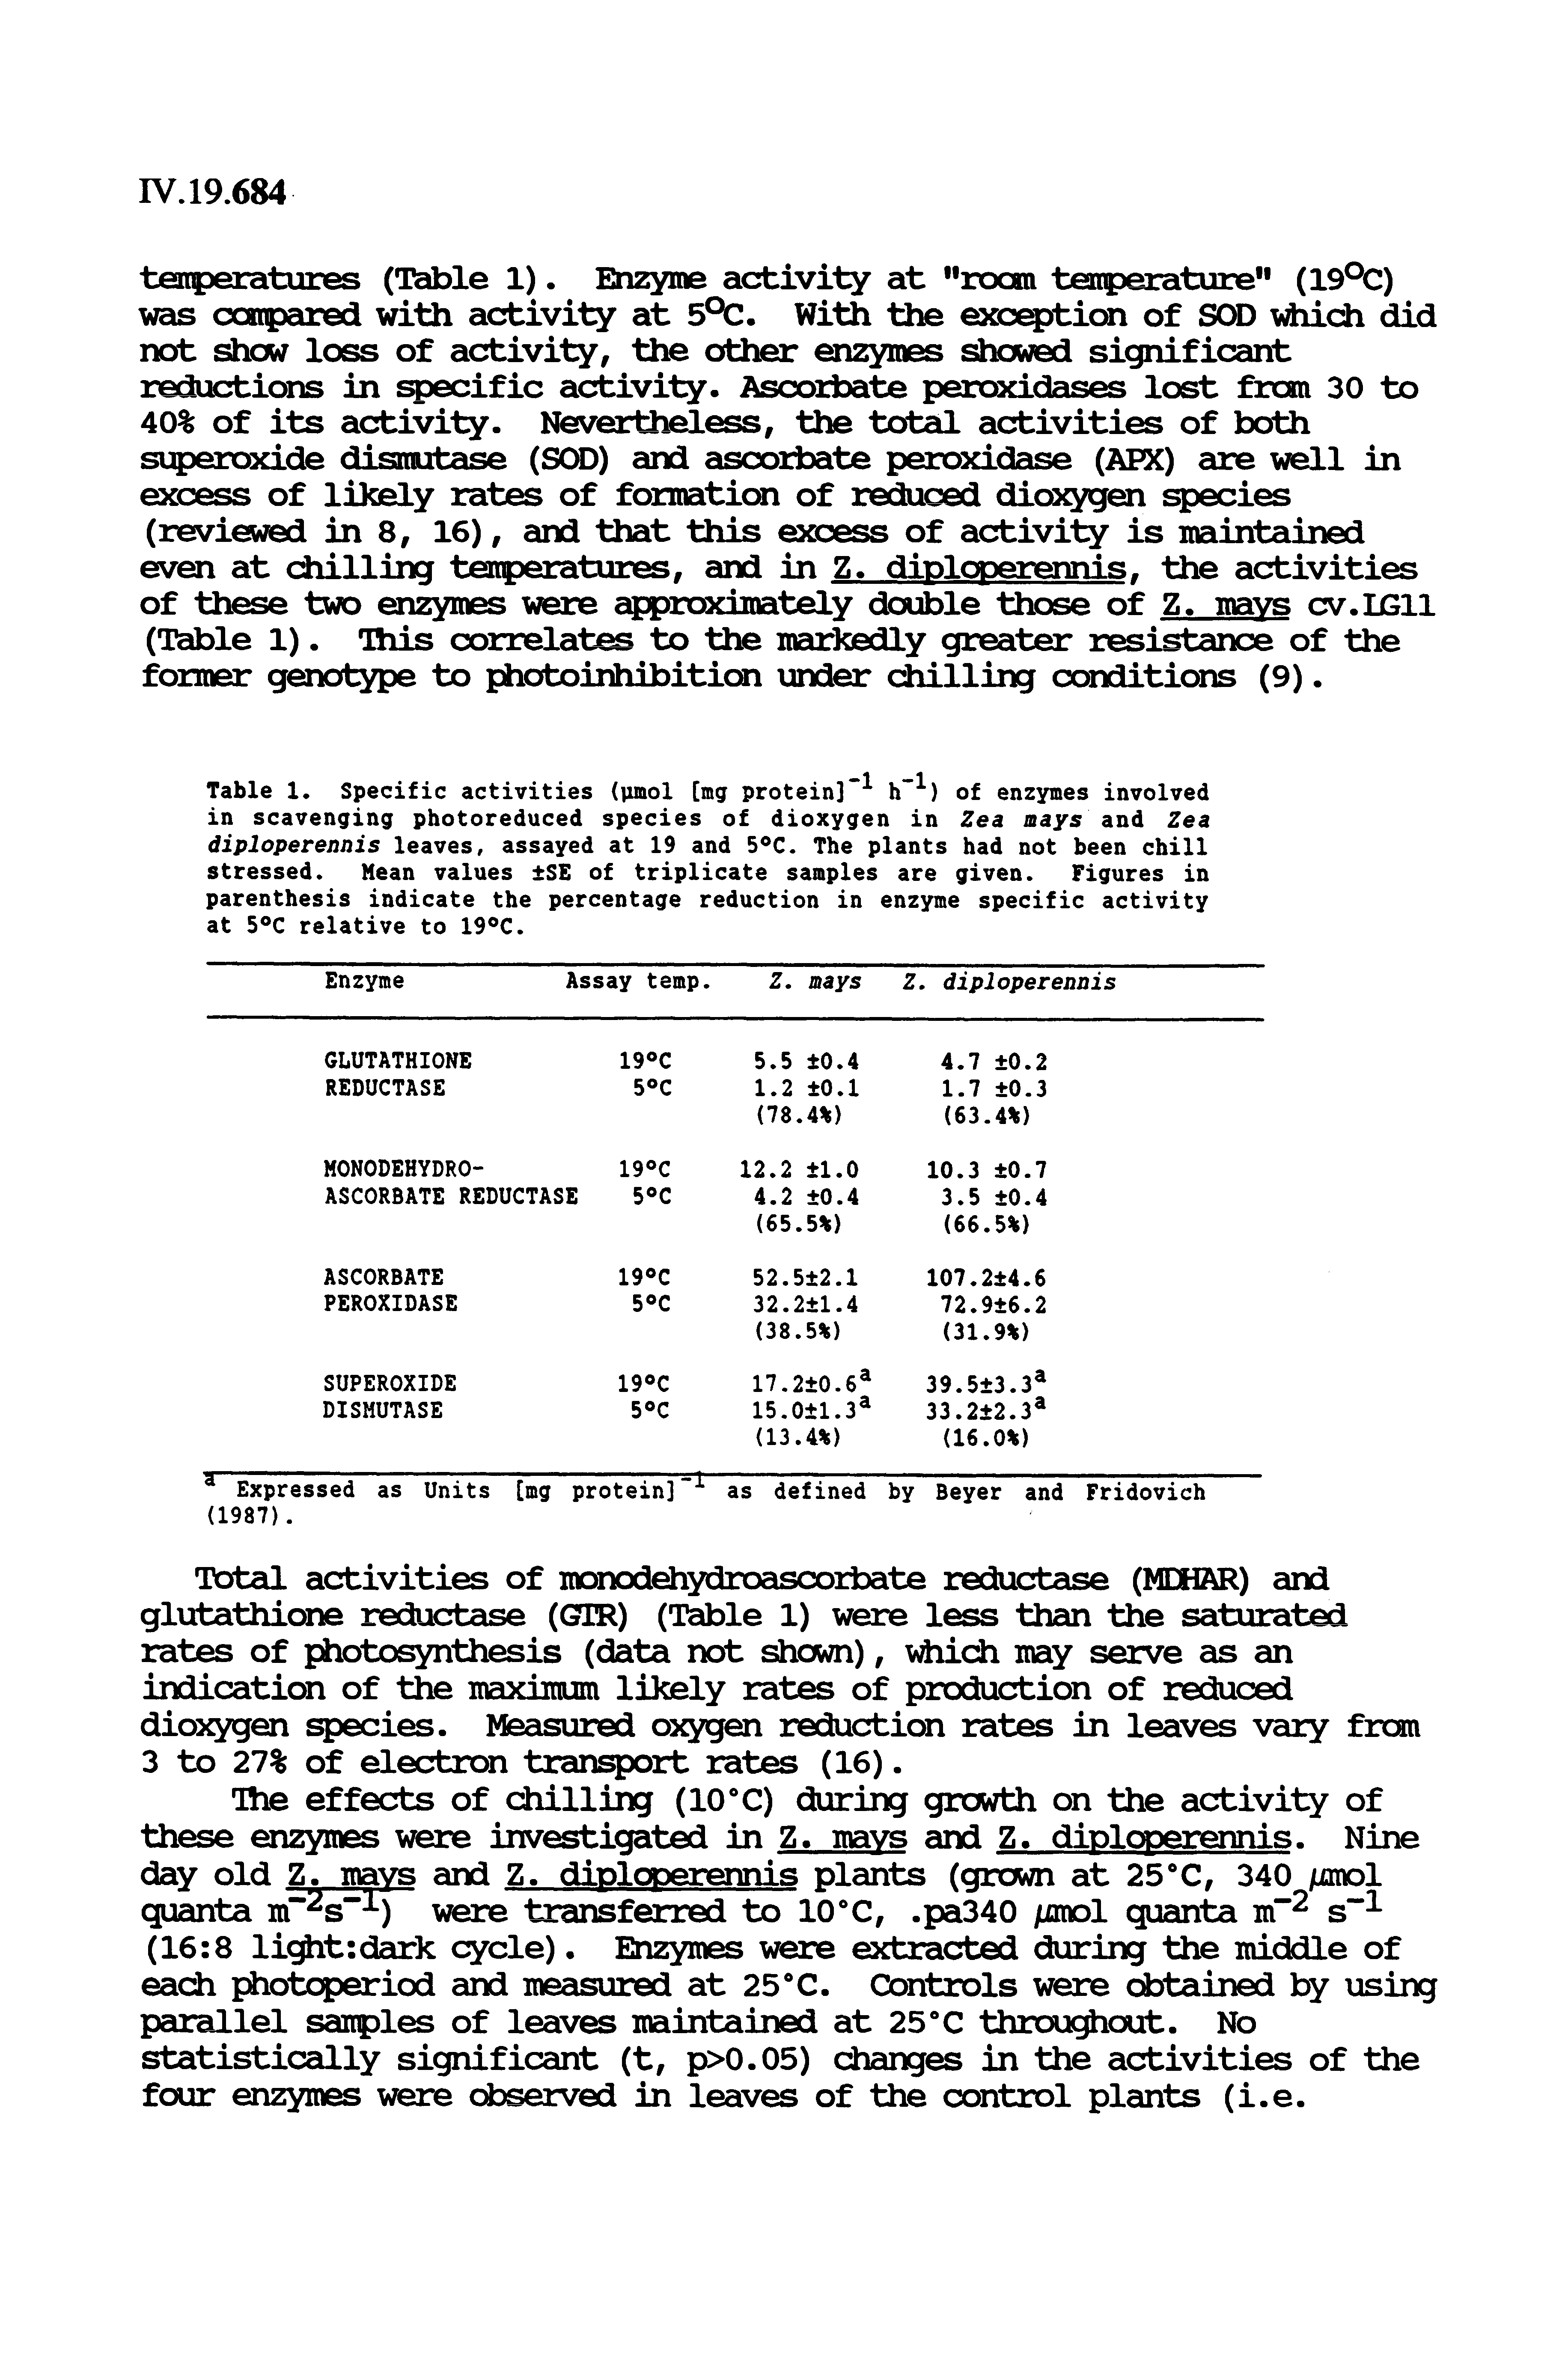 Table 1. Specific activities (pmol [mg protein] h ) of enzymes involved in scavenging photoreduced species of dioxygen in Zea mays and Zea diploperennis leaves, assayed at 19 and The plants had not been chill stressed. Mean values SE of triplicate samples are given. Figures in parenthesis indicate the percentage reduction in enzyme specific activity at 5 C relative to 19 C.